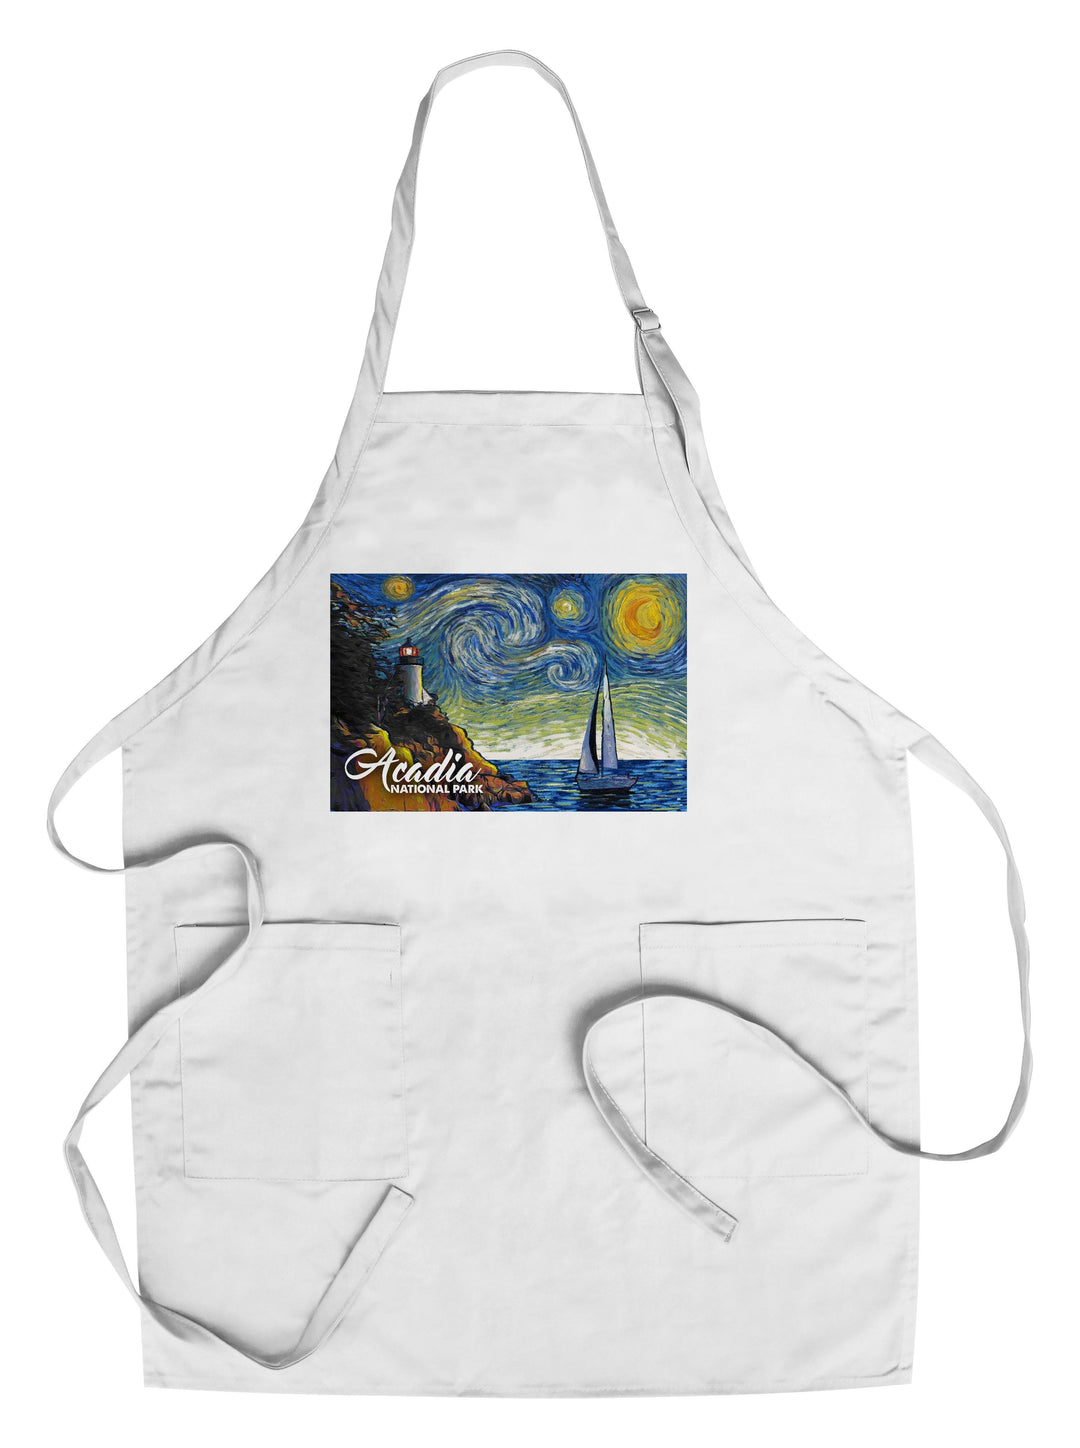 Acadia National Park, Maine, Bass Harbor Lighthouse, Starry Night National Park Series, Lantern Press Artwork, Towels and Aprons Kitchen Lantern Press Chef's Apron 